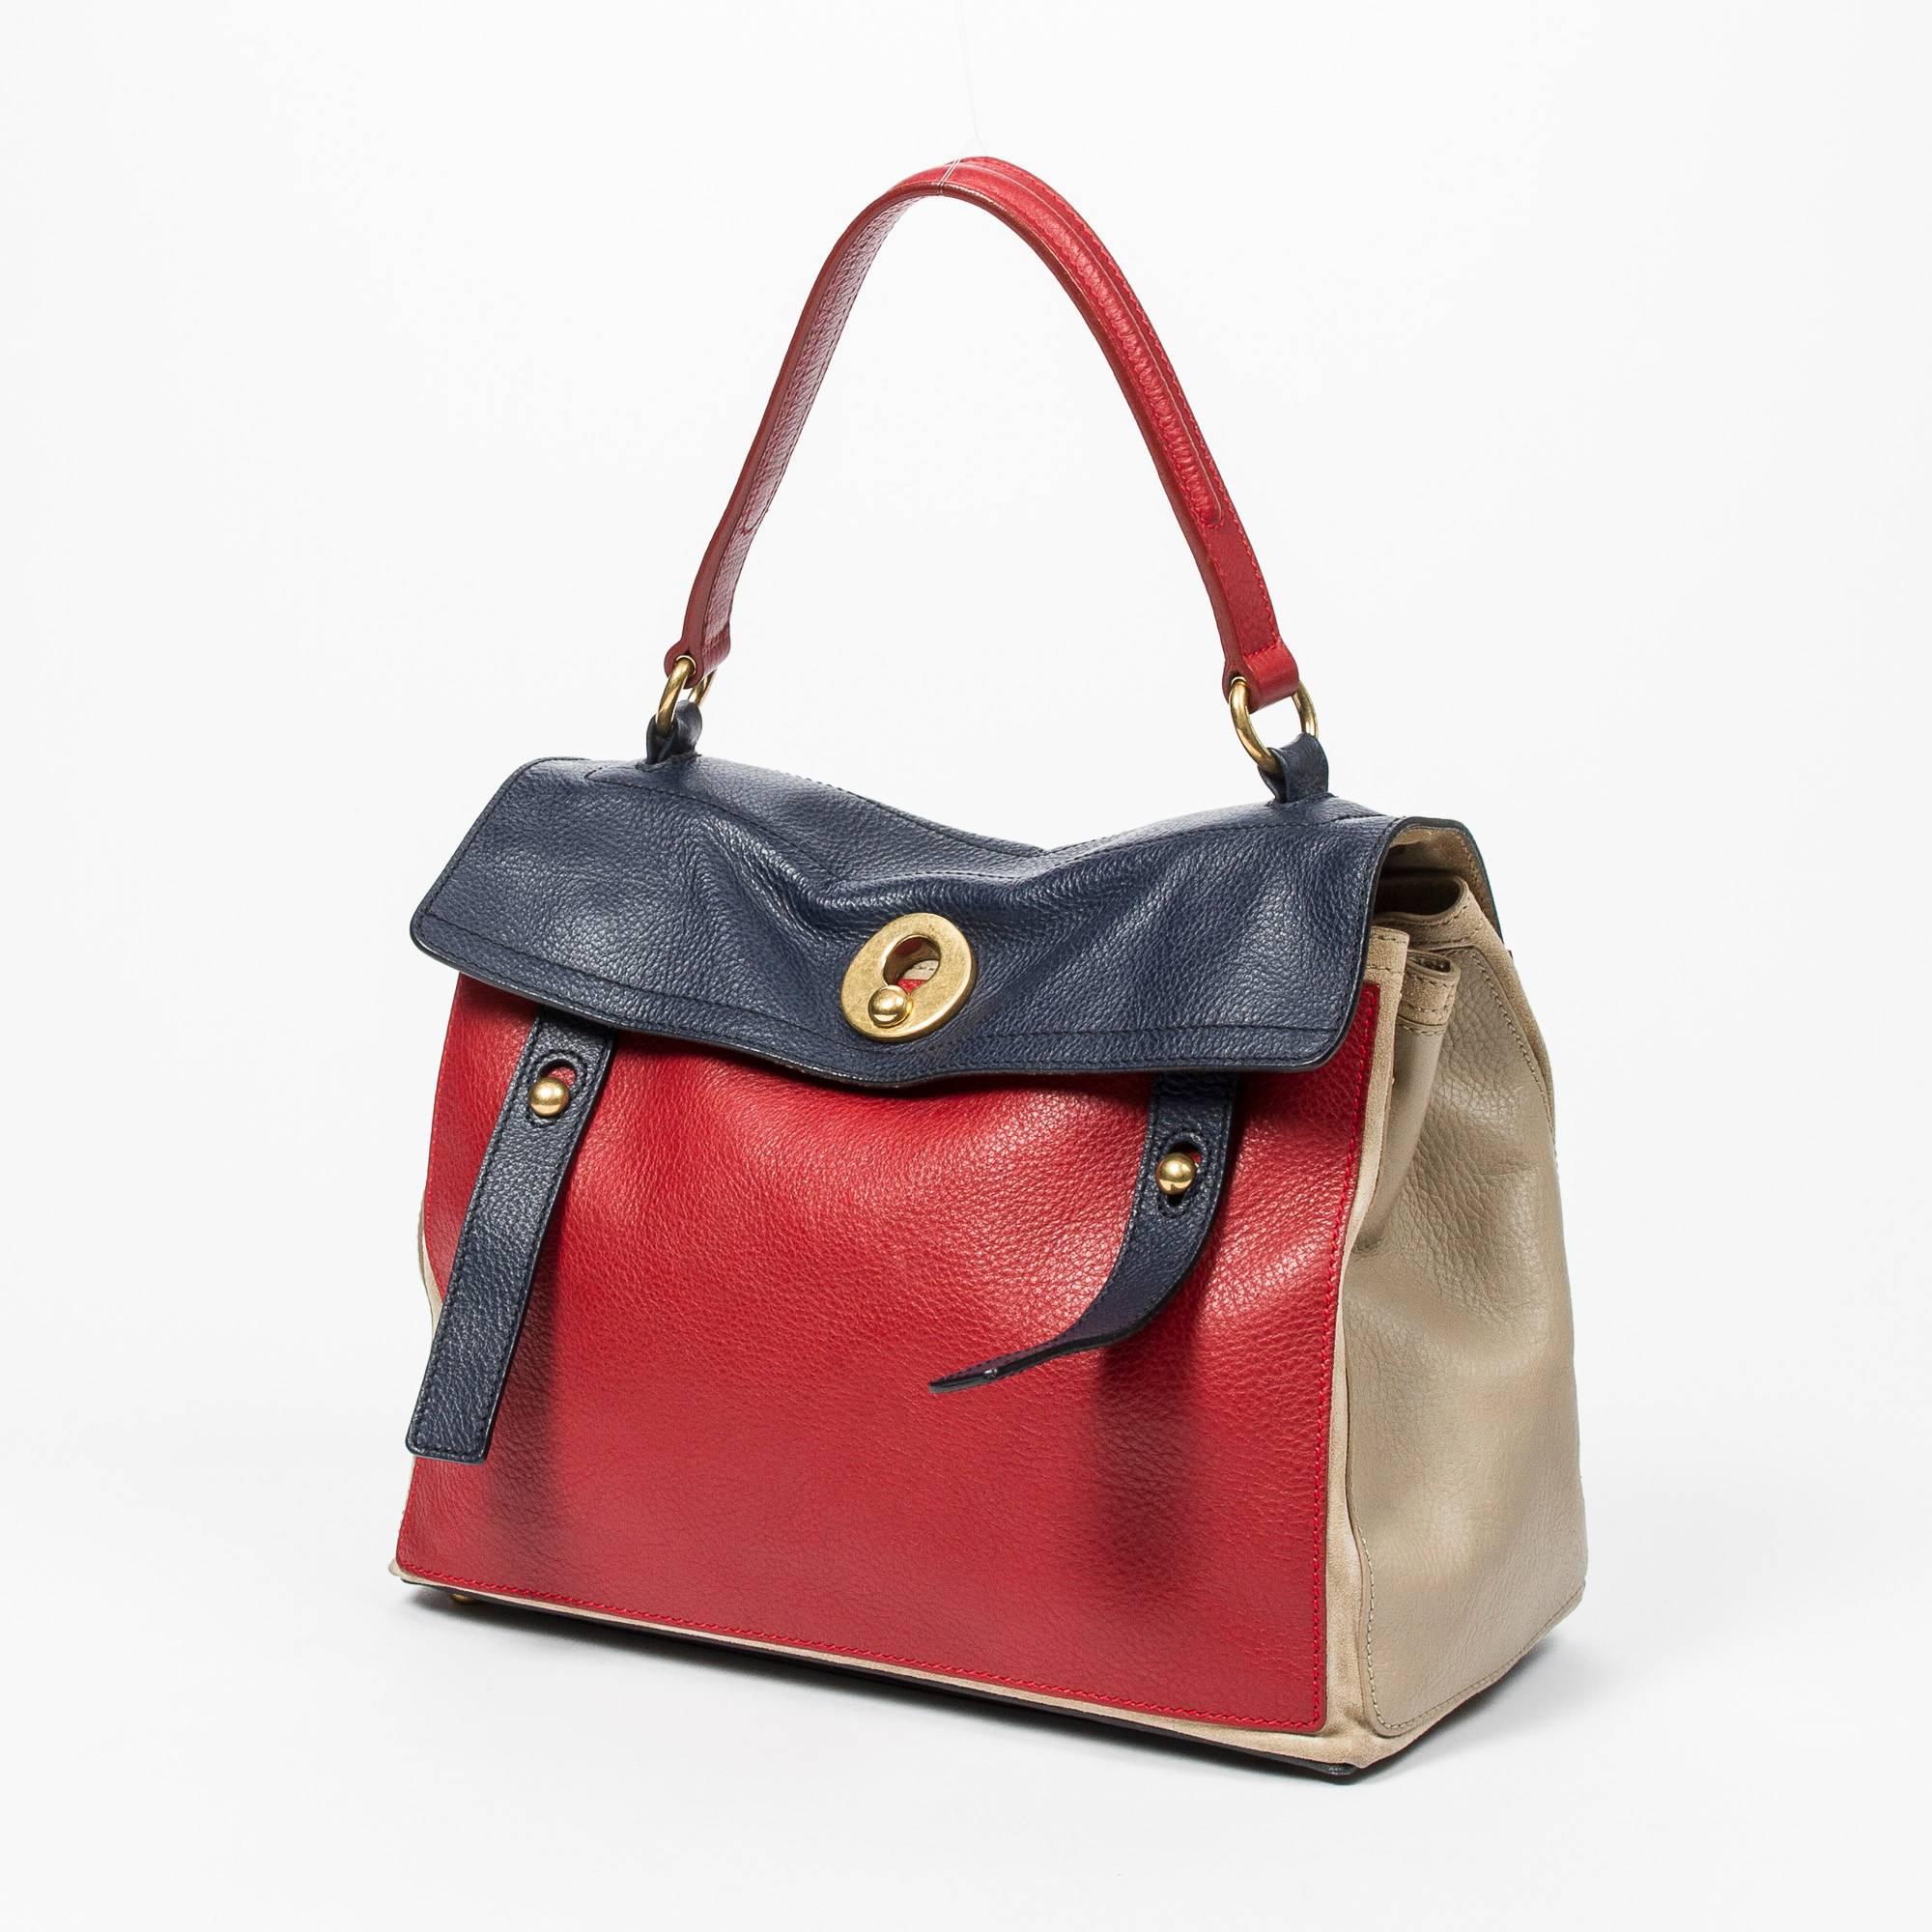 Yves Saint-Laurent Muse 2 Tricolor MM in blue, red and light grey suede and grained leather with brushed gold tone hardware. Canvas interior with 1 zip pocket and pen compartment. Good condition overall.